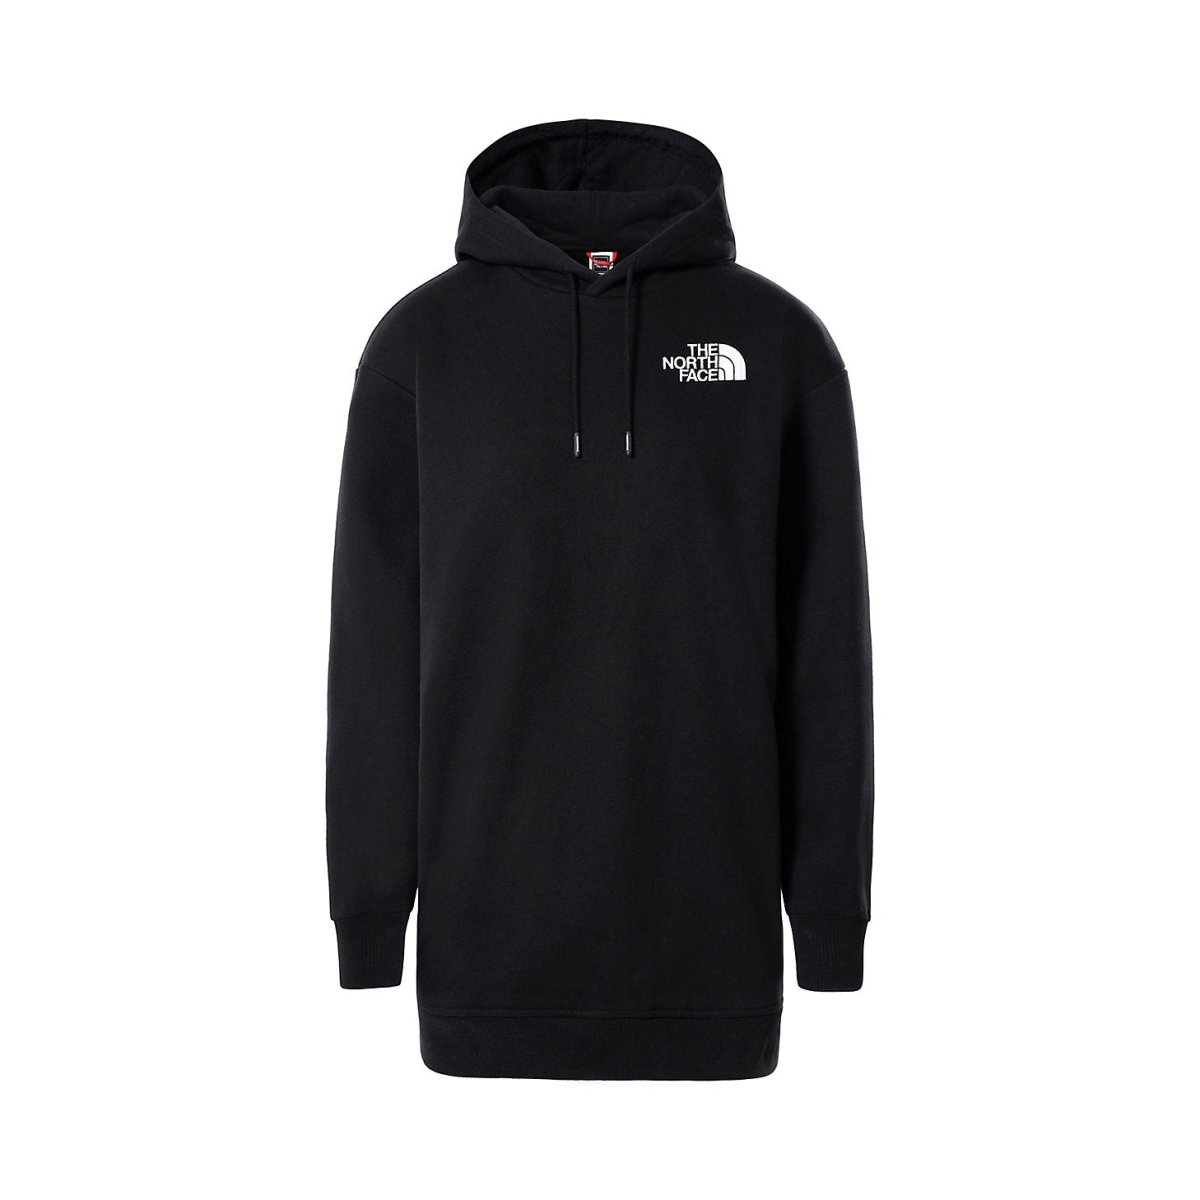 The North Face WMNS Oversized Hoodie (Schwarz)  - Allike Store